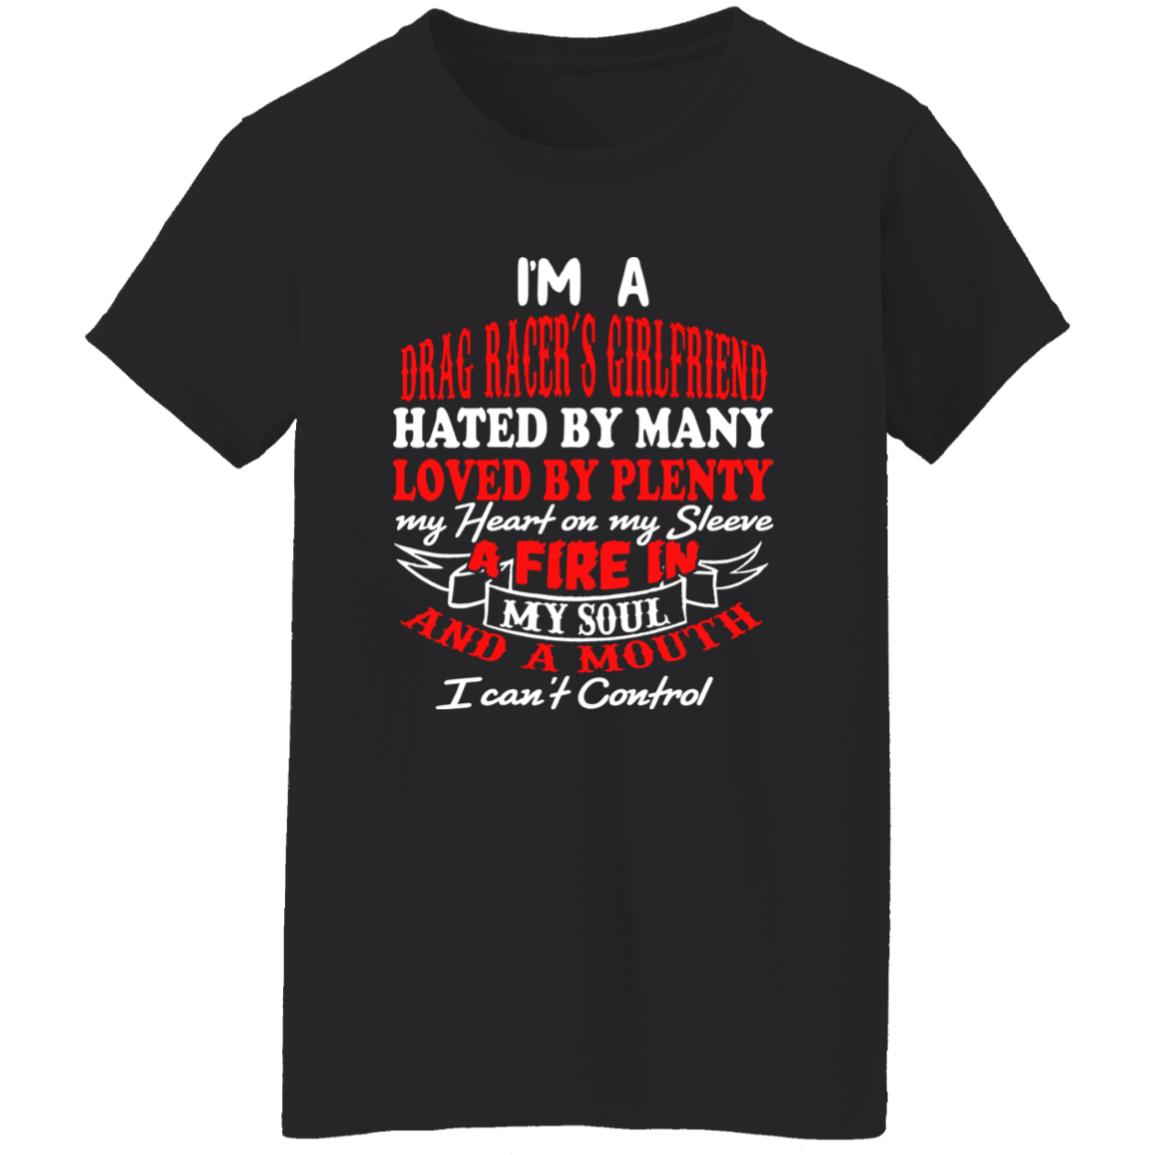 I'm A Drag Racer's Girlfriend Hated By Many Loved By Plenty Ladies' 5.3 oz. T-Shirt